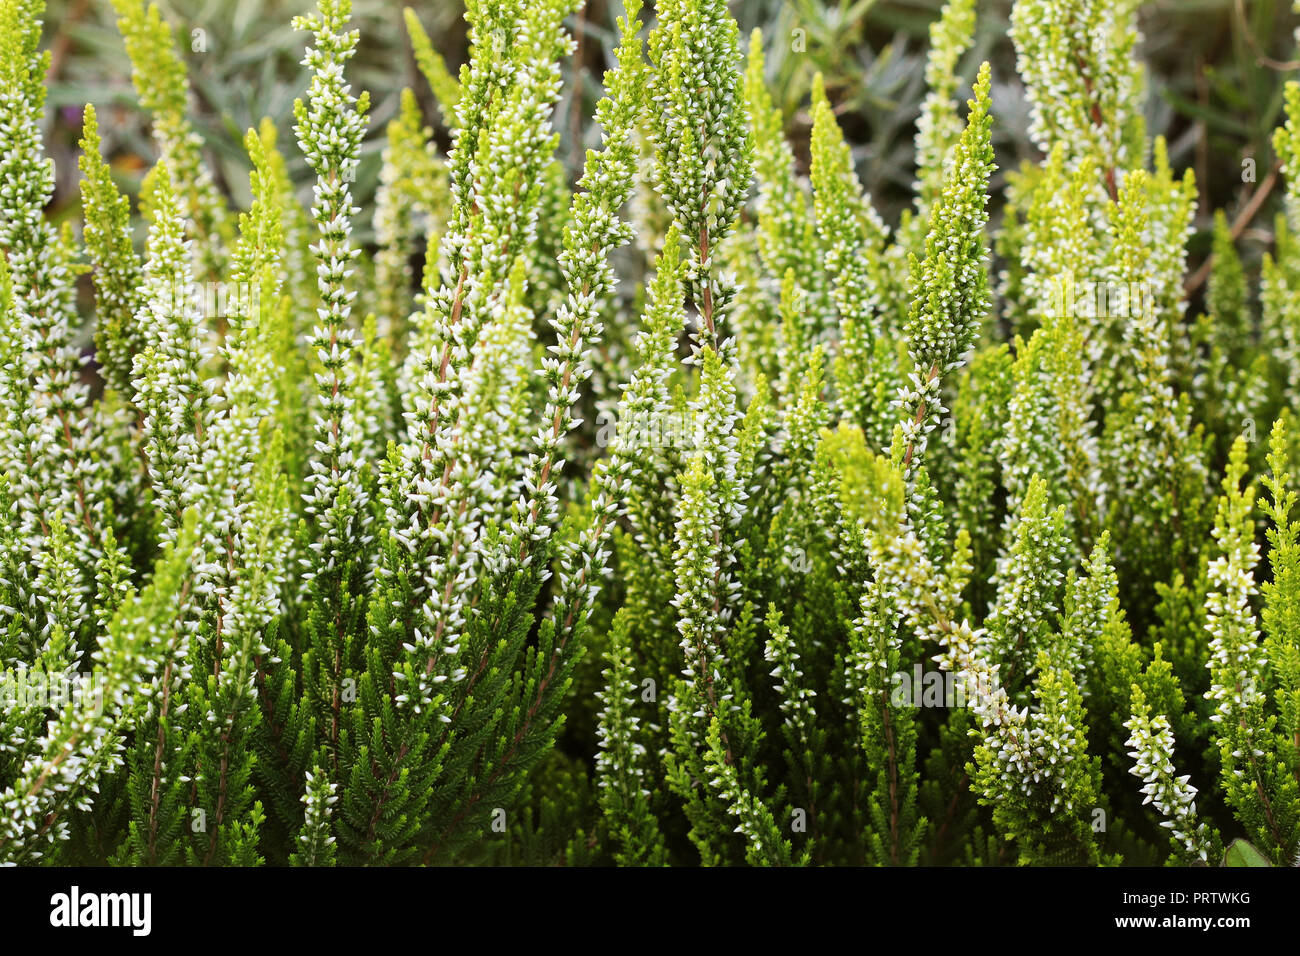 Blooming field of Ling also called Common and Scottish Heather, White Heather flowers (Calluna vulgaris) Stock Photo